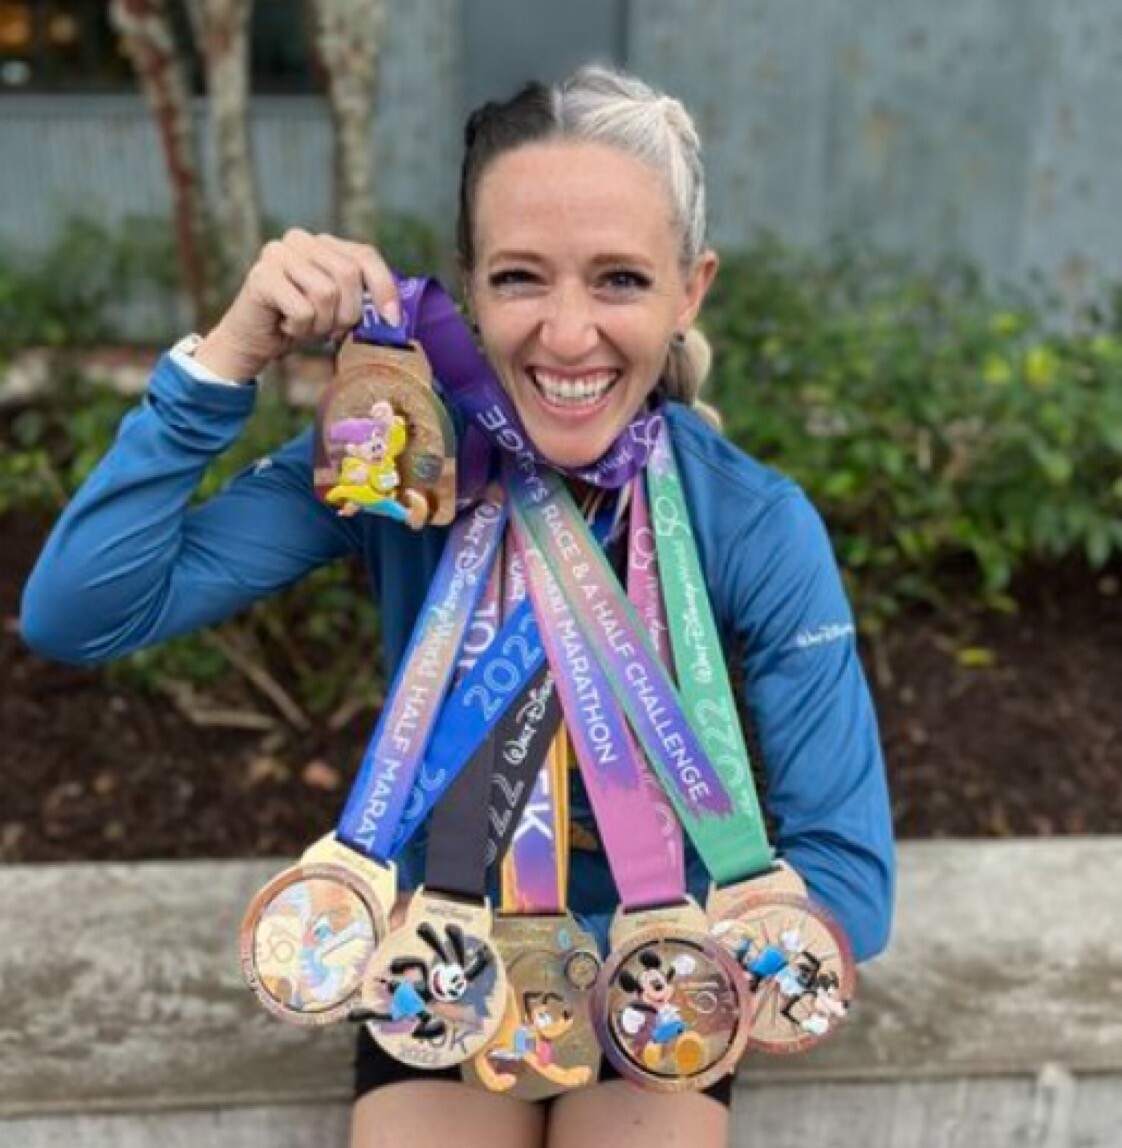 Colorado runner Brittany Charboneau climbed to the top of the podium on four occasions this past weekend at the Disney Marathon Weekend in Orlando Florida